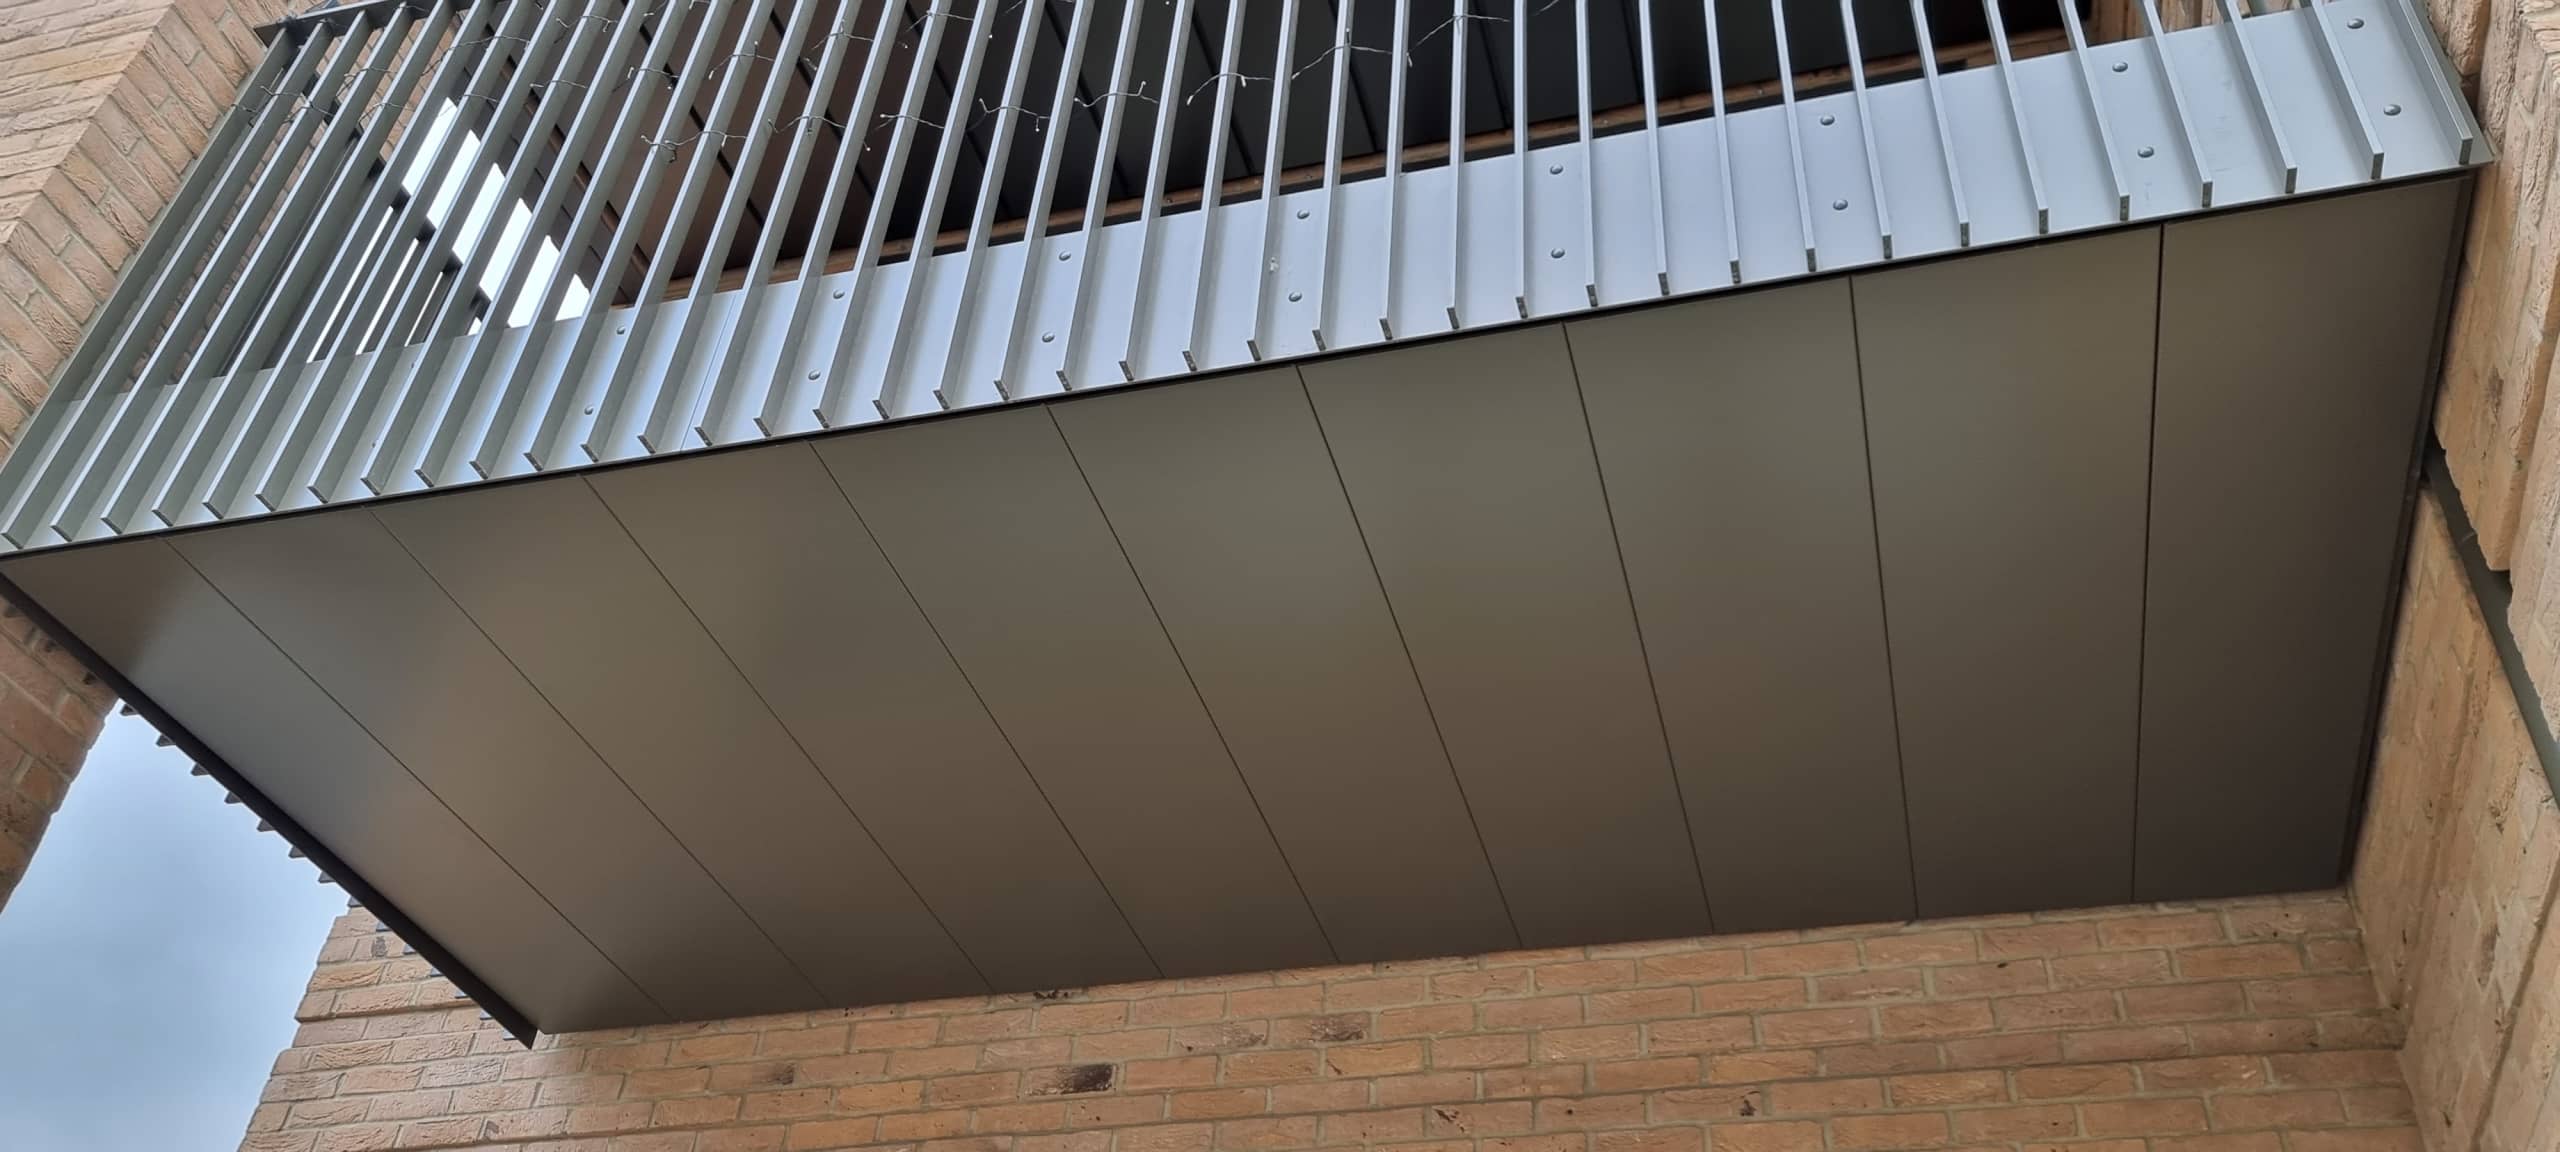 Drainage of an inset balcony using soffits. Balcony recessed between a brick column and a wall